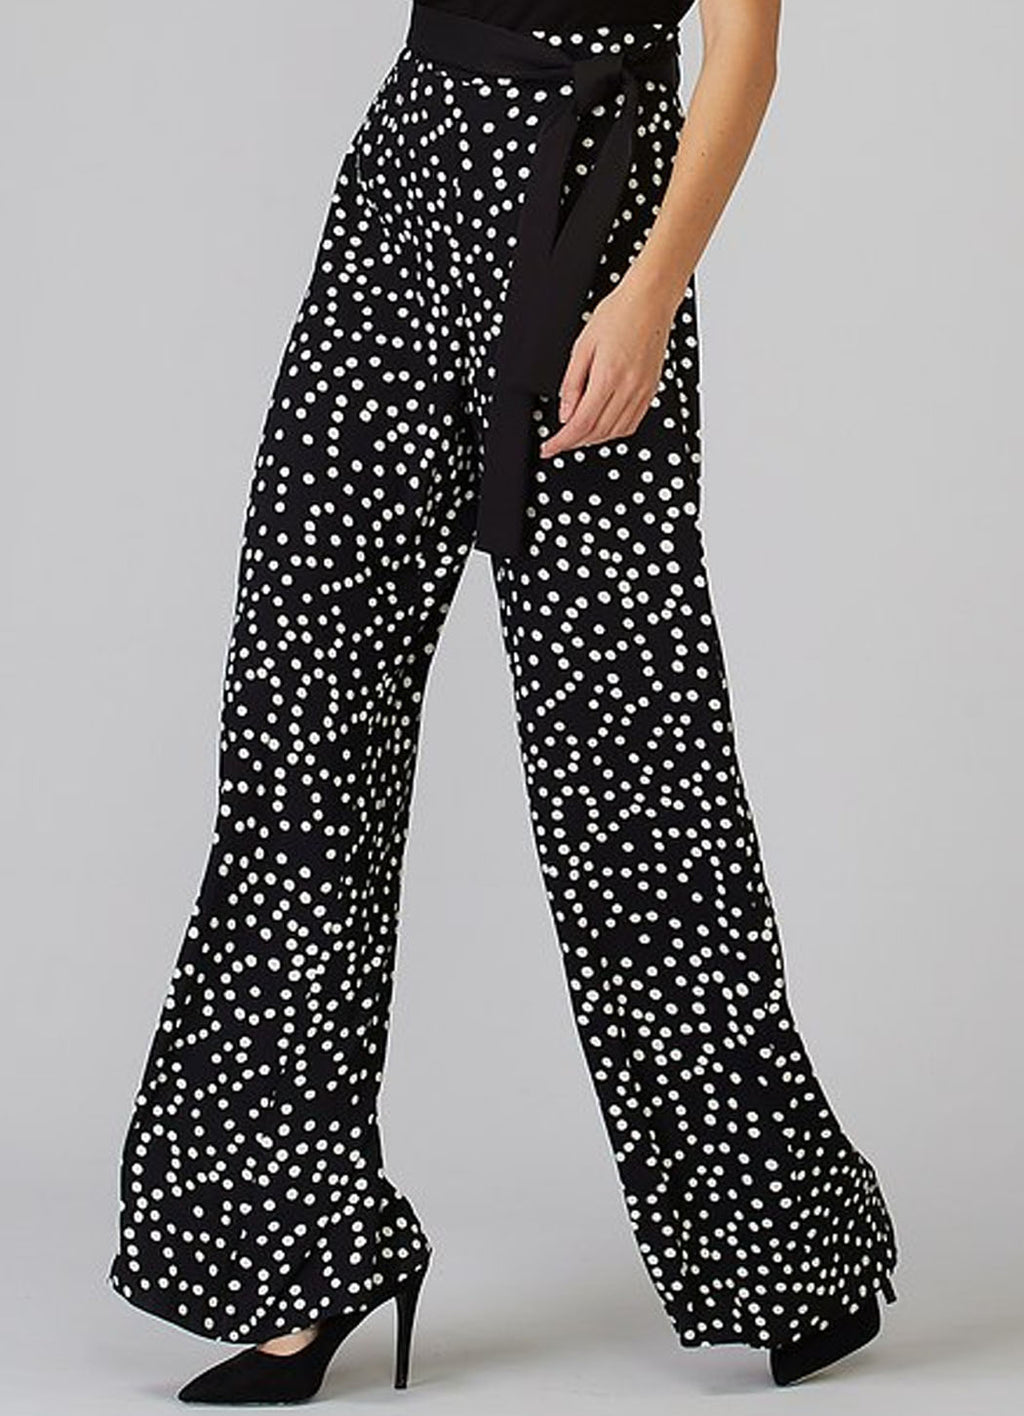 Red and Black Polka Dots Pants For Flamenco ref. 3806